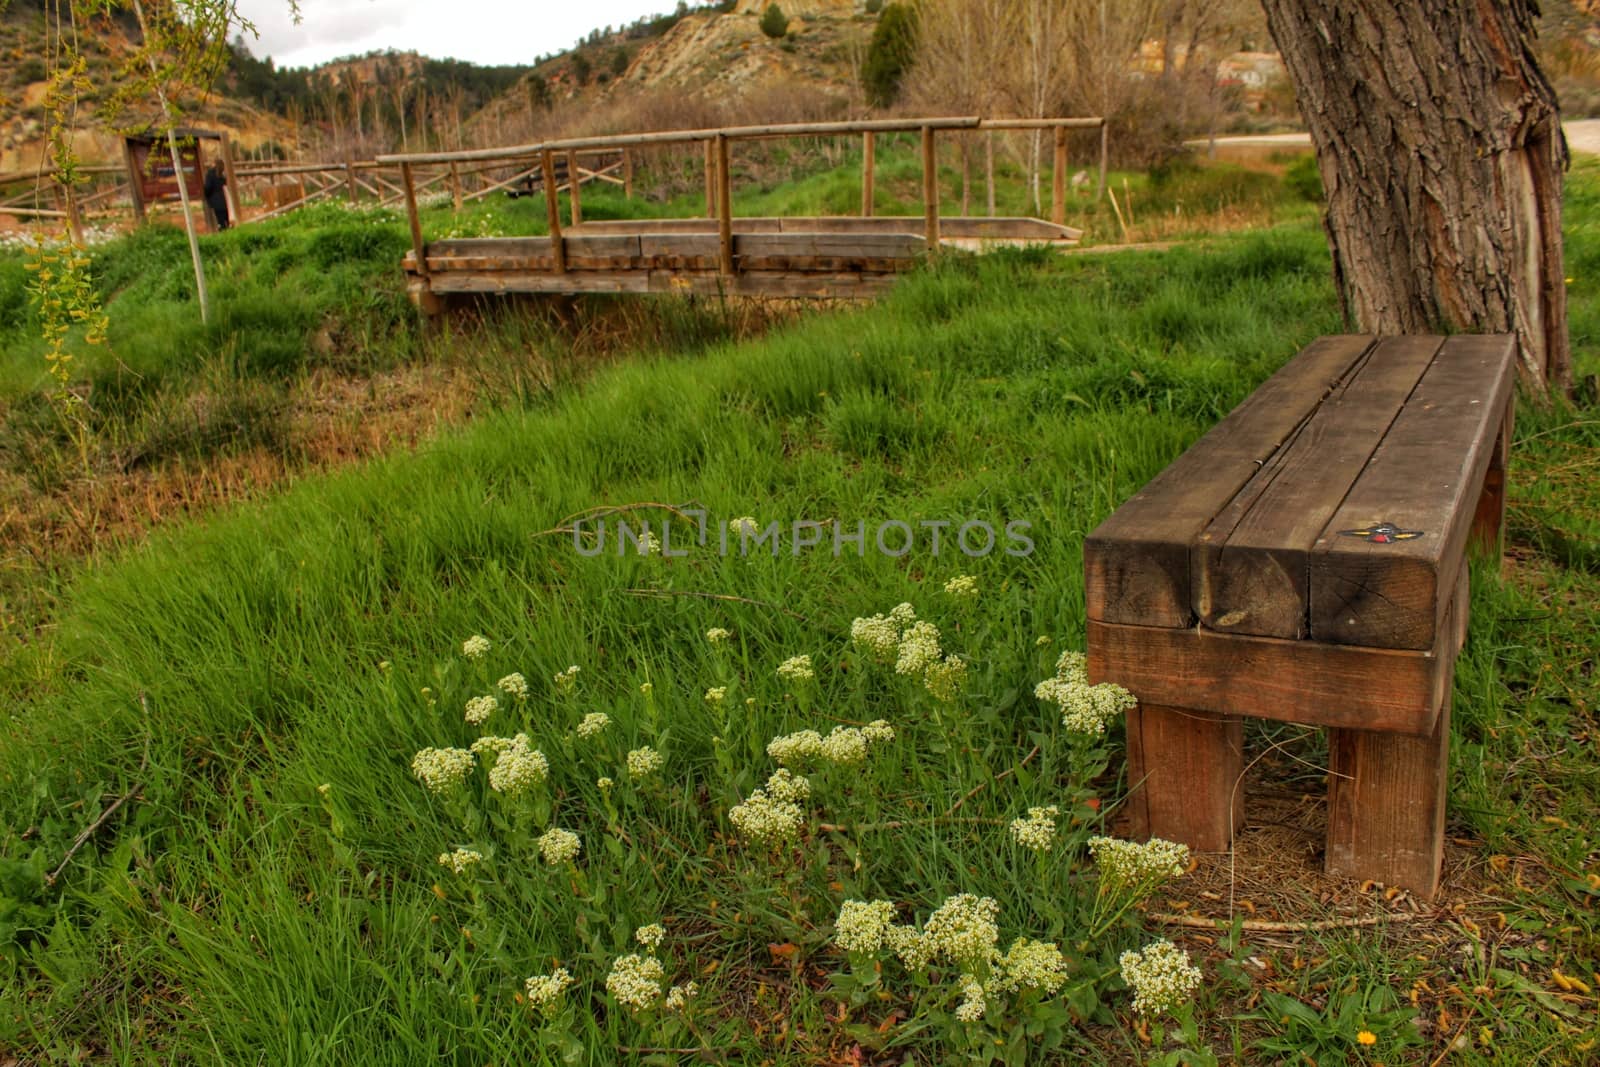 Wooden bench surrounded by vegetation and flowers in a park in a village of Spain